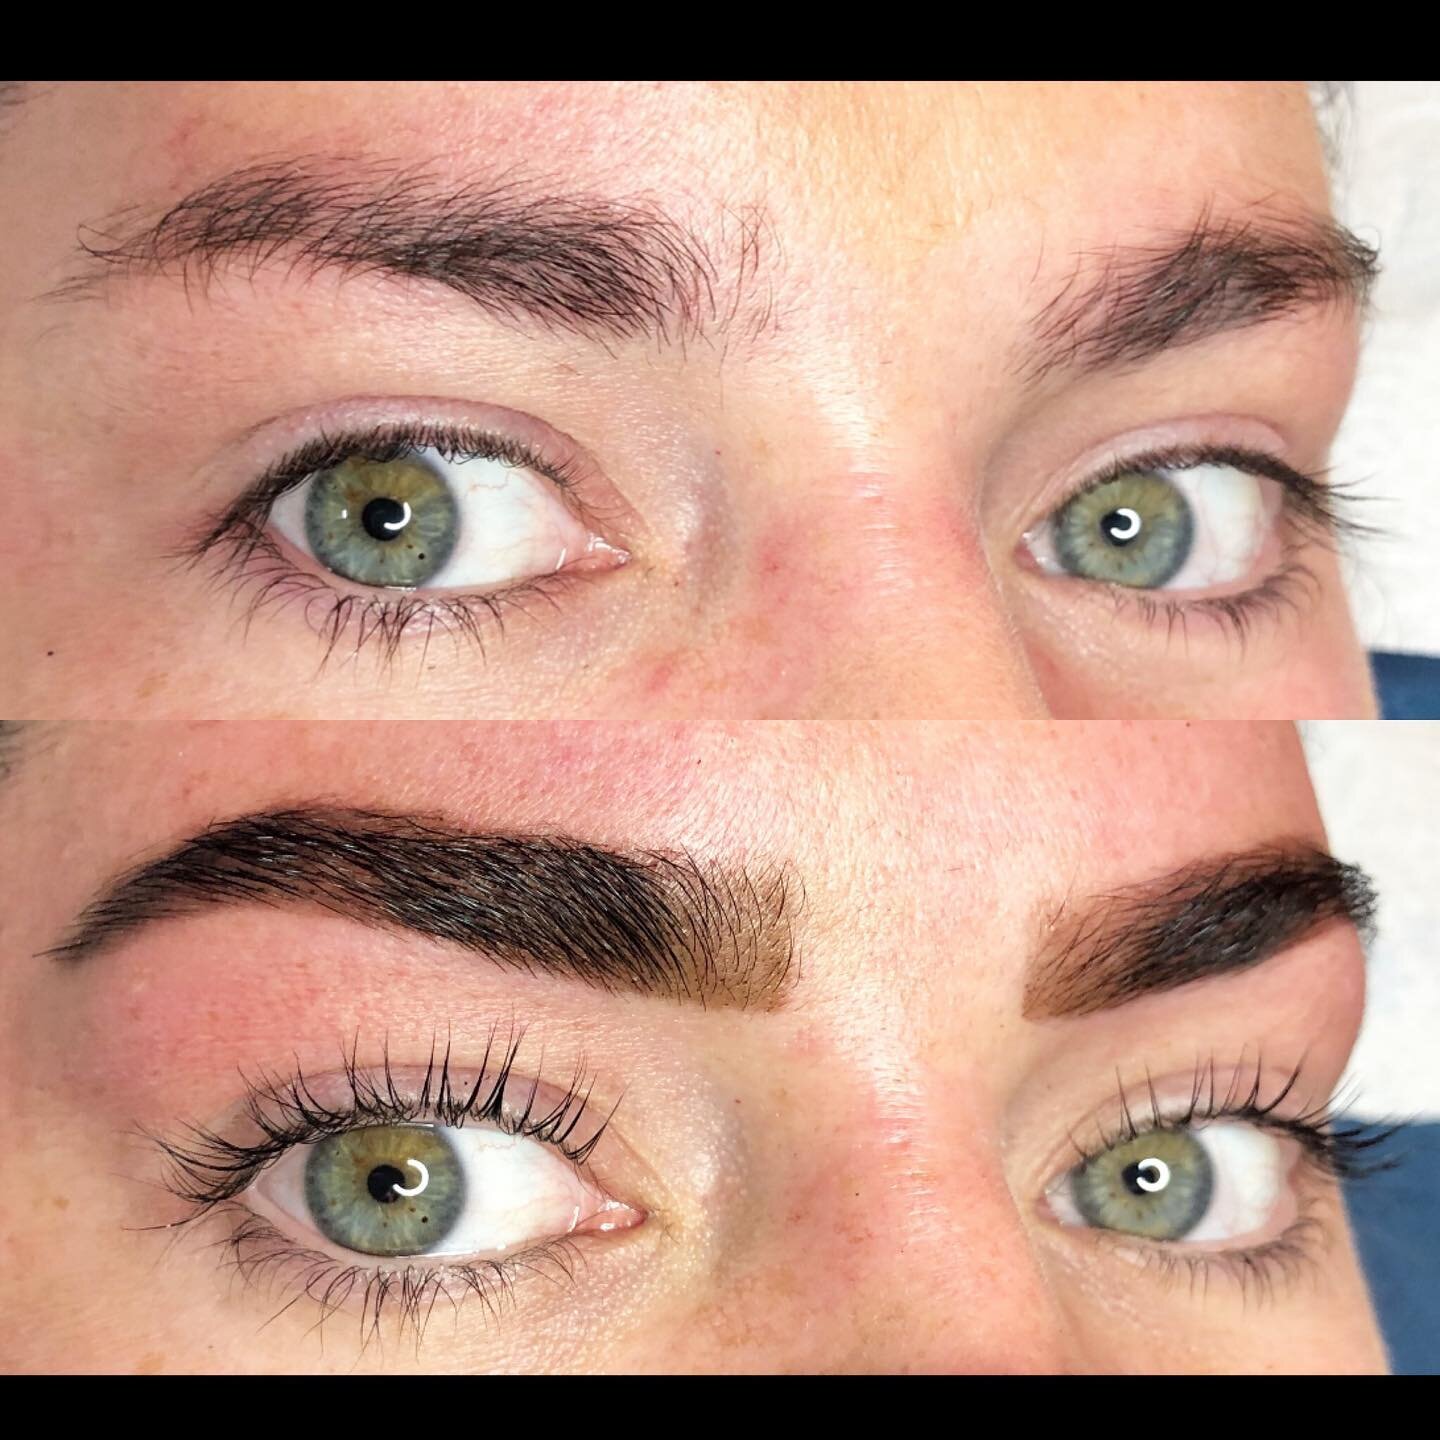 Henna brow and lash lift transformation!!! Using the finest qualify products from @supercilium.browhenna and @lashbase_uk 
I mean wow. My client has the LOONGEST natural lashes ever. Now imagine these with mascara 🥺💕 serious natural lash goals 😩🙏